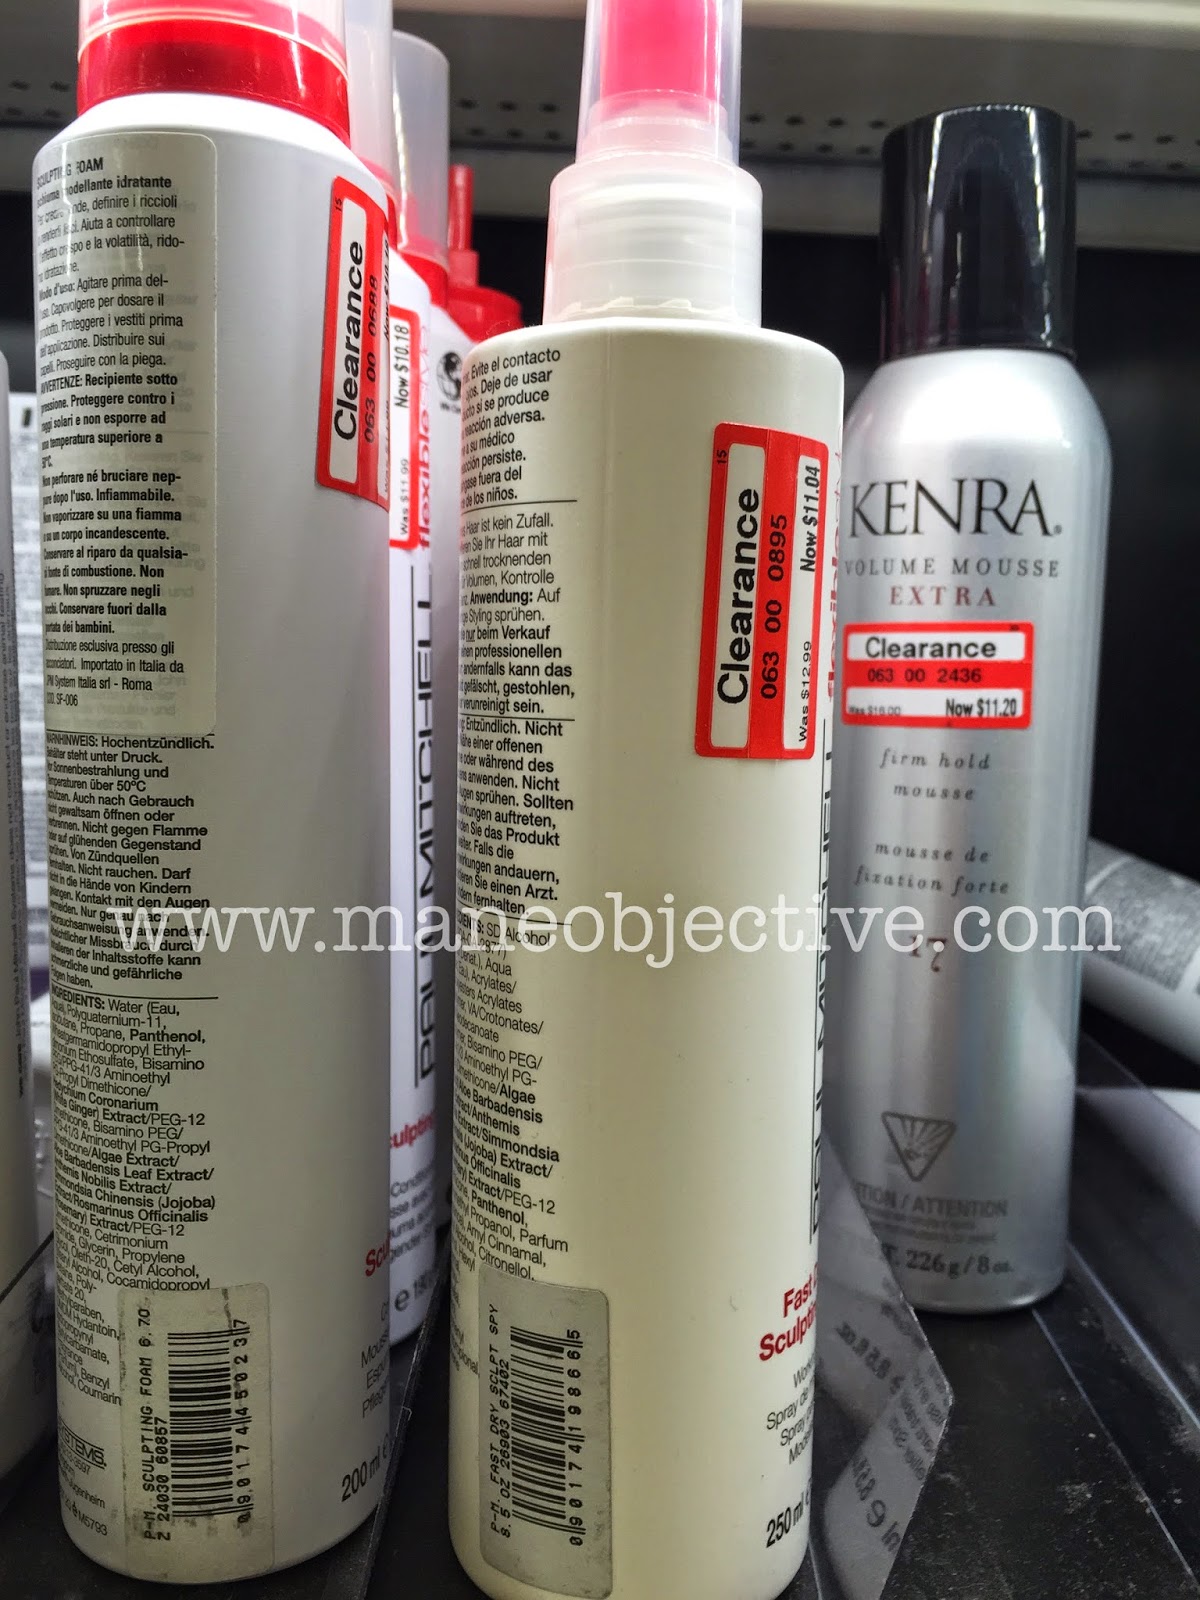 Buyer Beware: Your Salon Products Might Be Fake (How to Spot Gray Market Products)